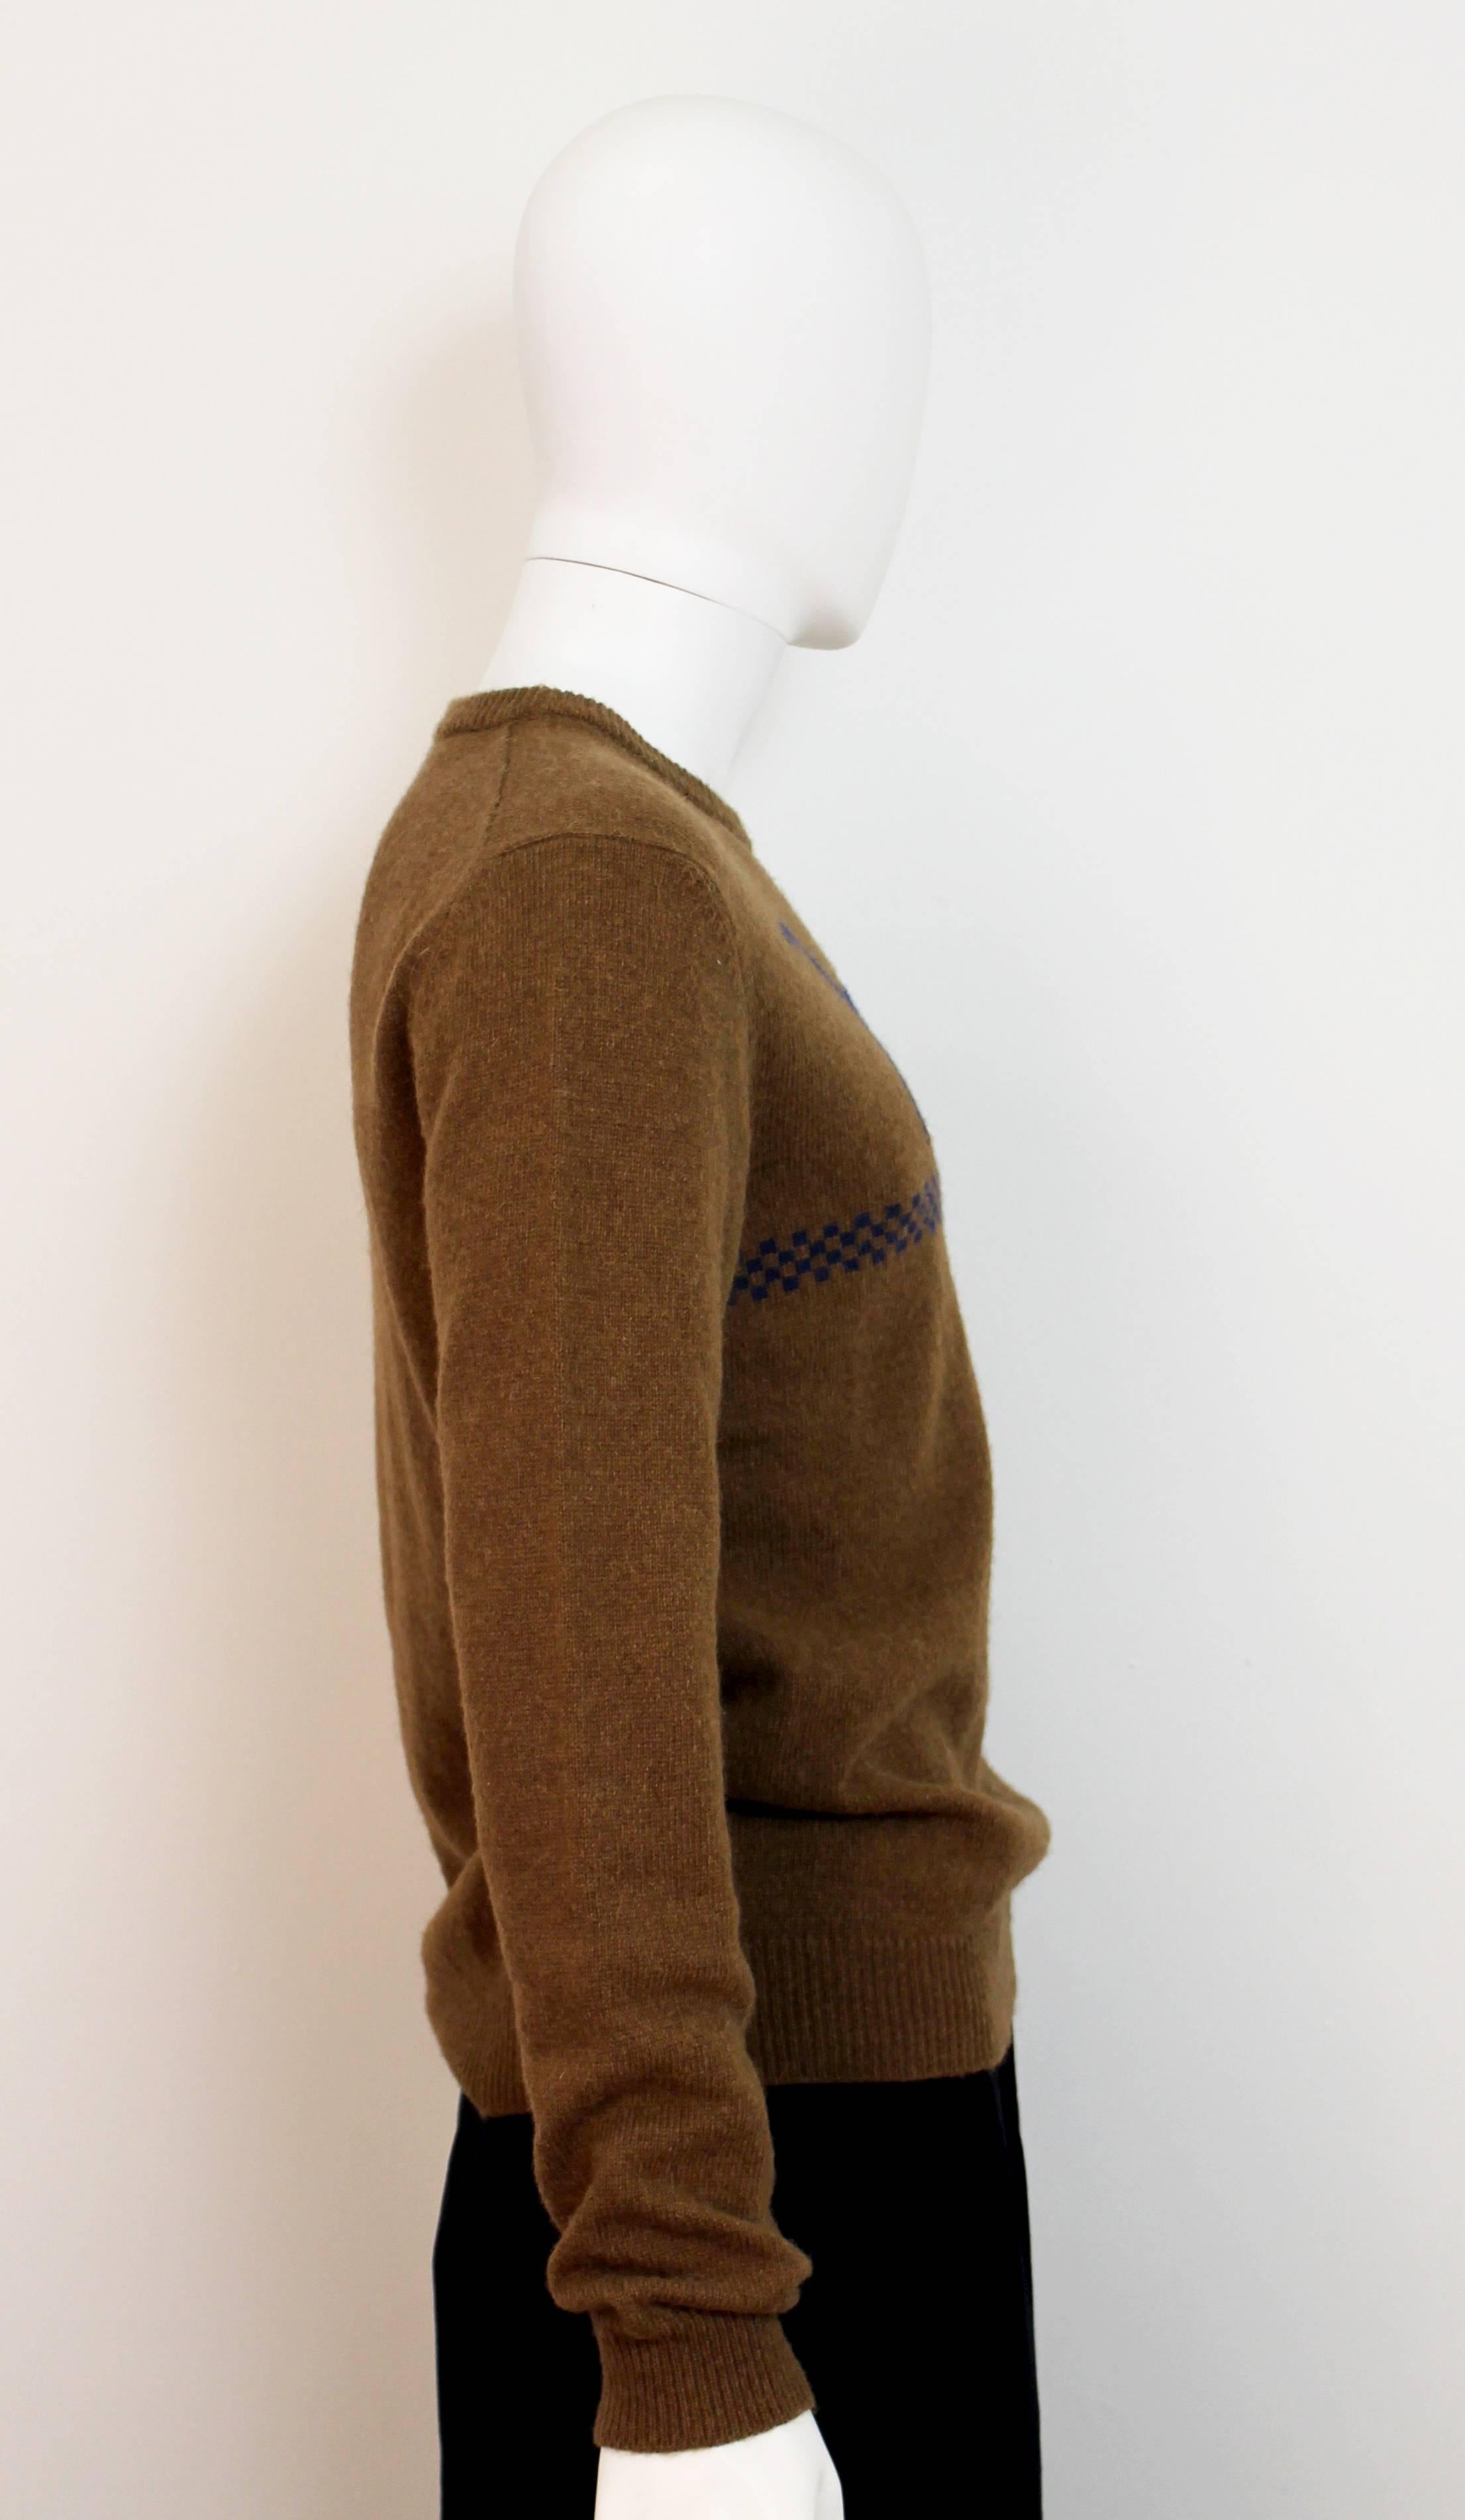 Jil Sander brown jumper from their Autumn/Winter 2012 collection. Features a blue dinosaur and checked motif. A great example of classic Raf Simons style.